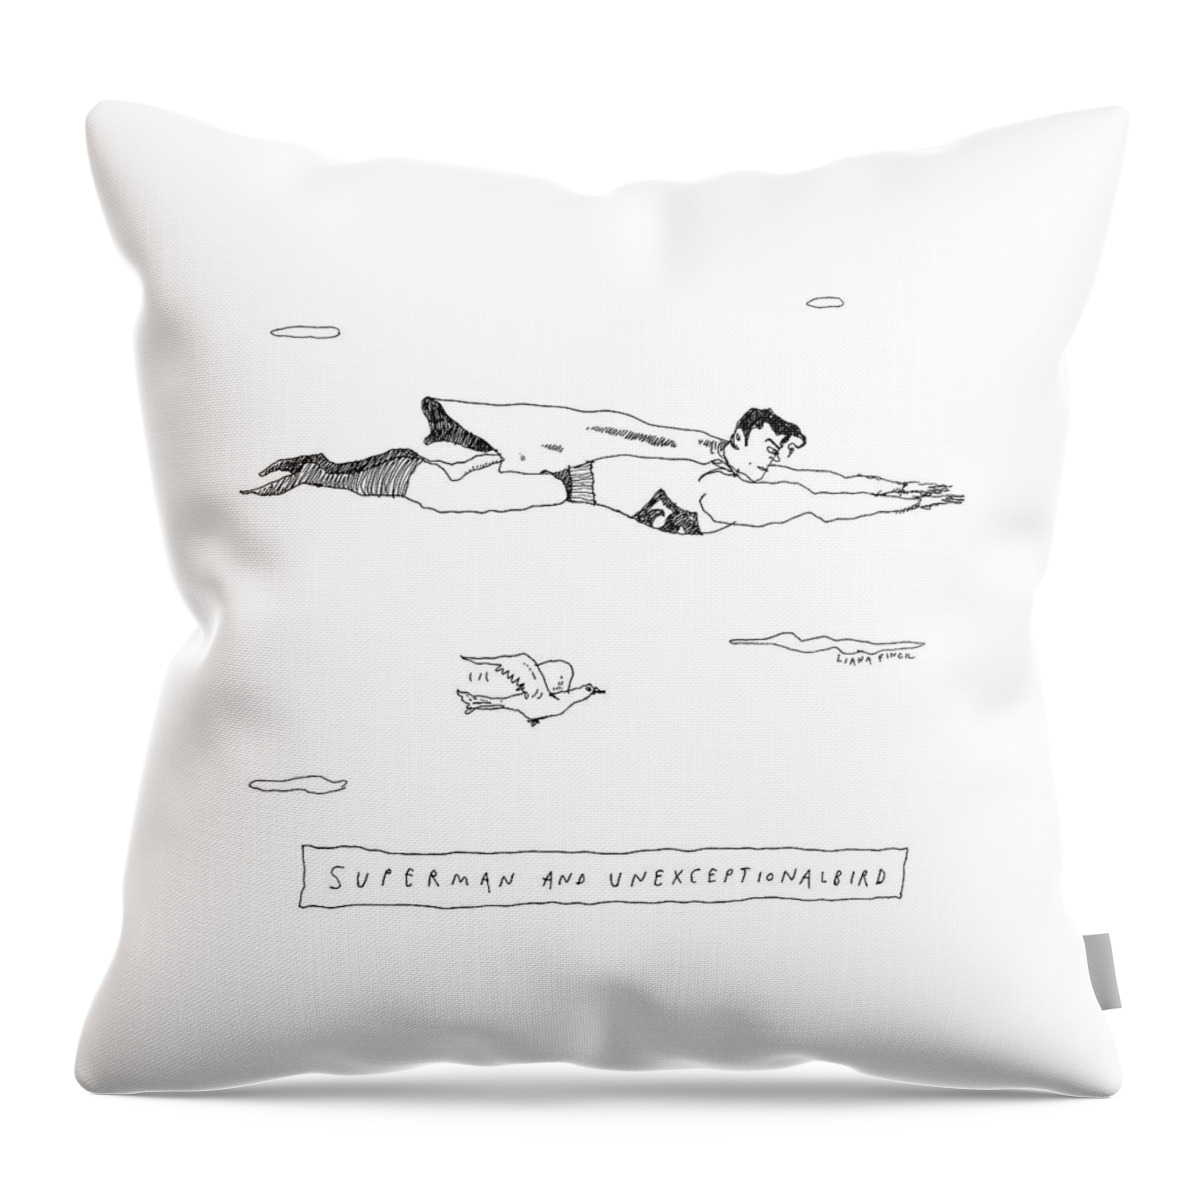 Title: Superman And Unexceptionalbird. Superman Throw Pillow